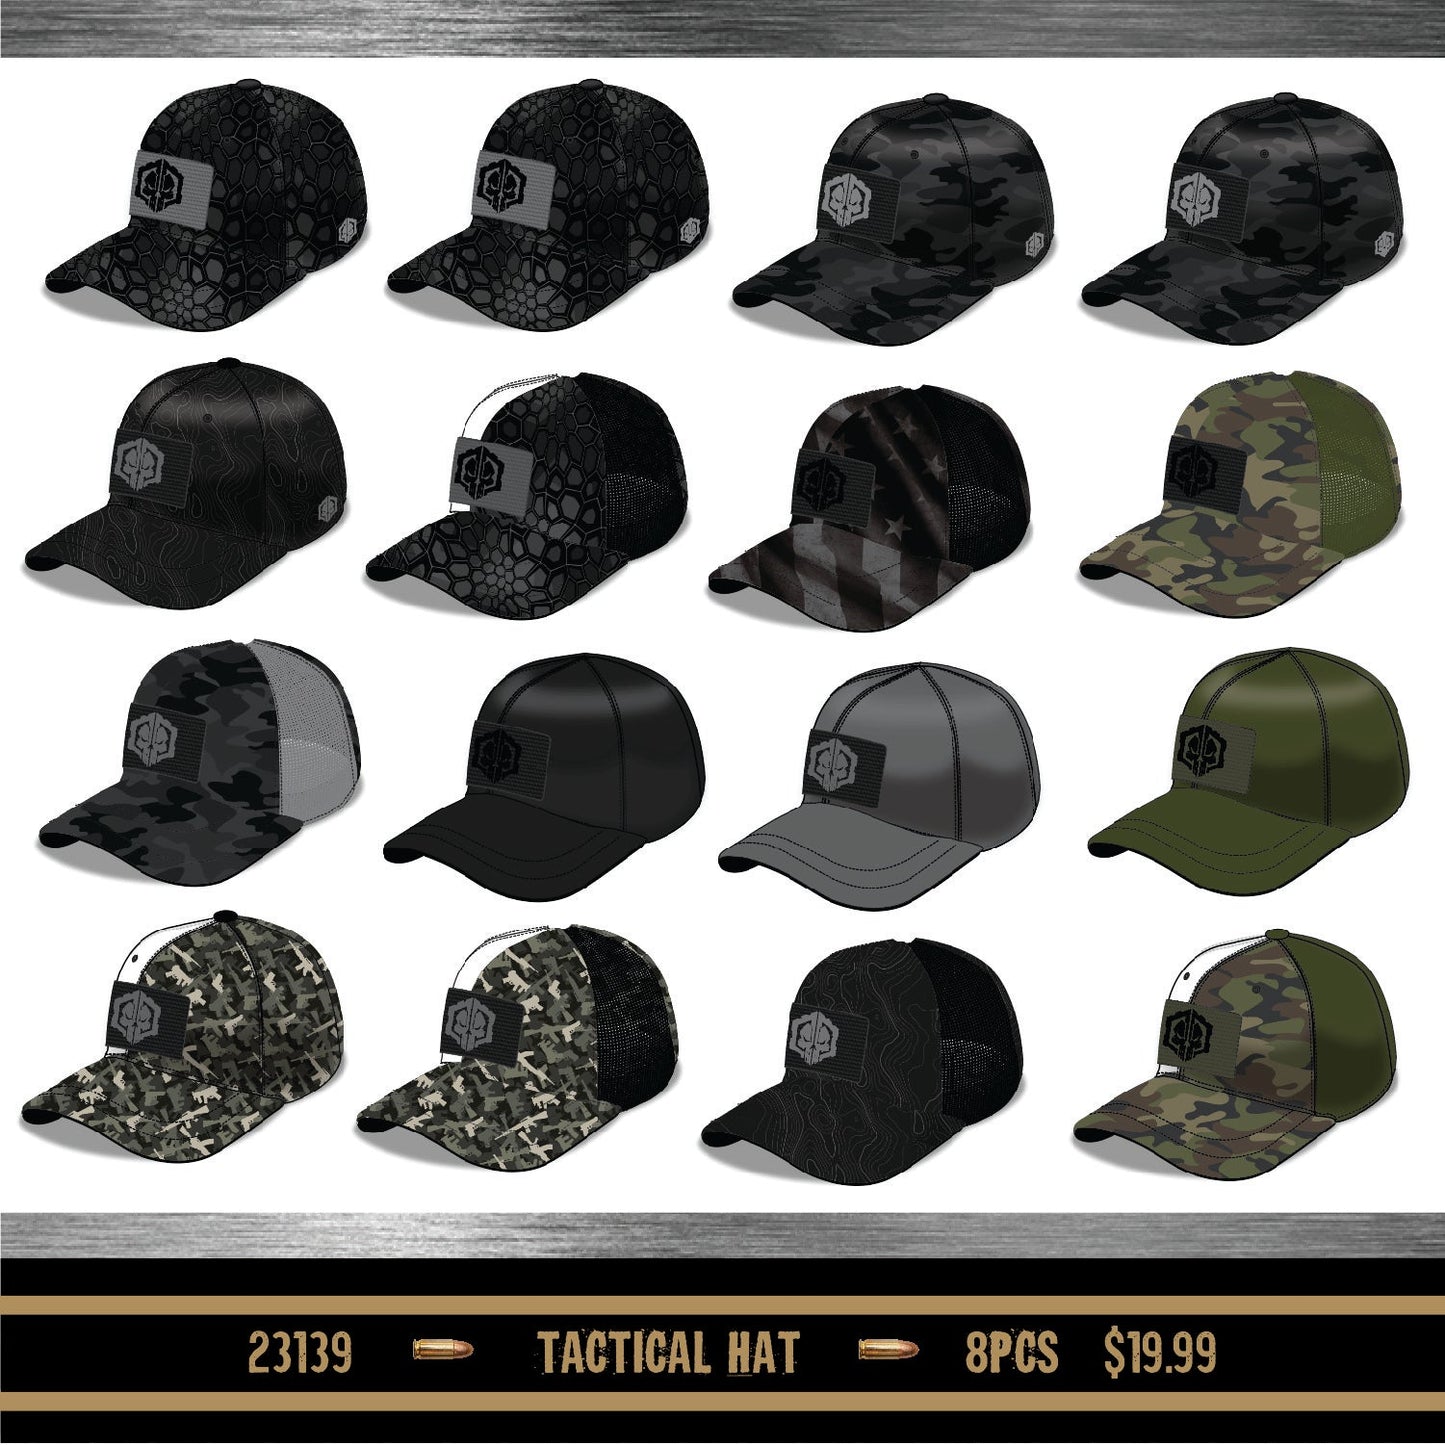 ITEM NUMBER 023139L STRETCH FIT TACTICAL HAT - STORE SURPLUS NO DISPLAY 8 PIECES PER PACK